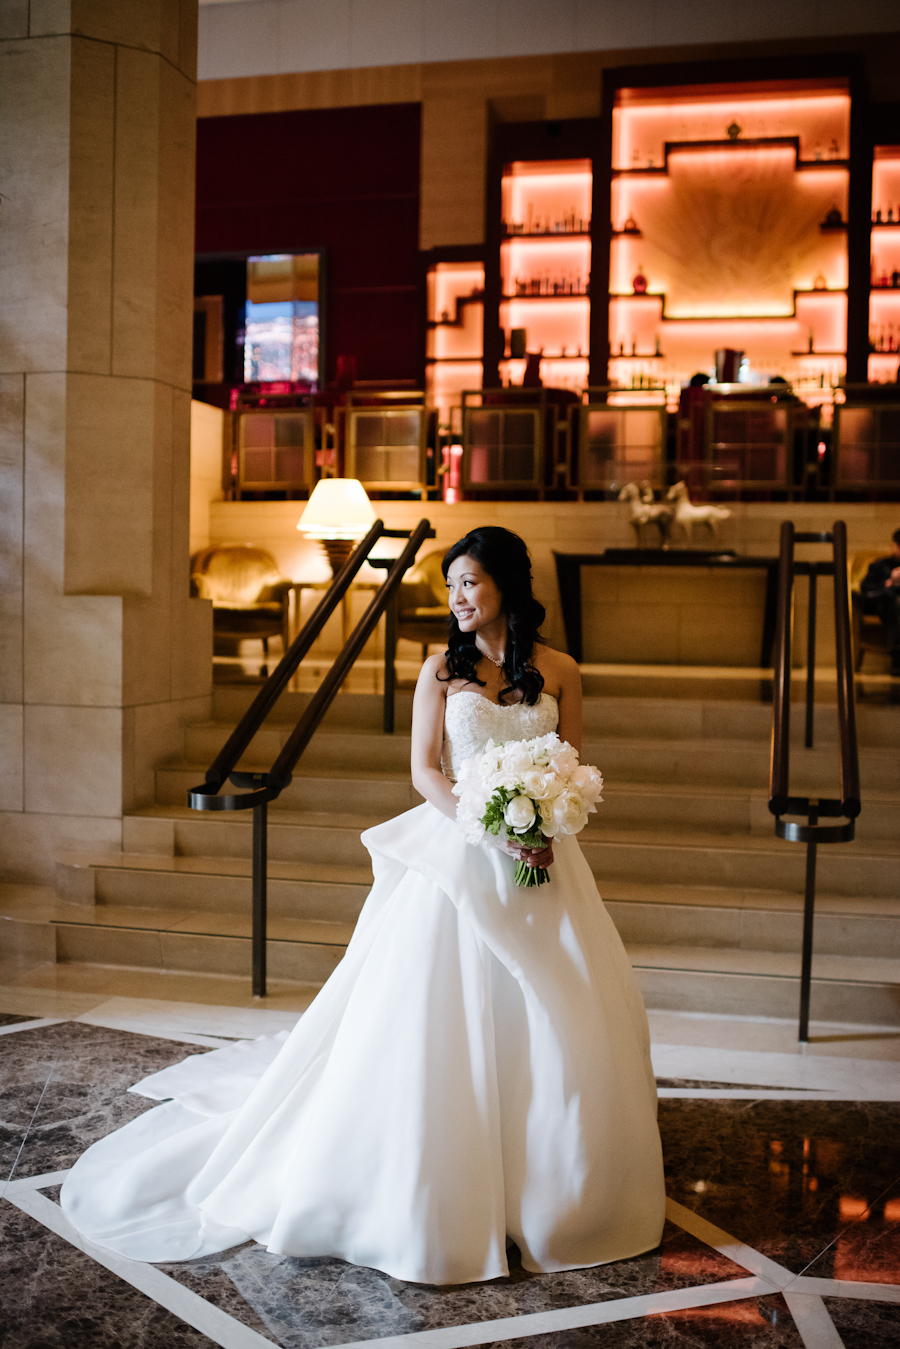 four seasons hotel wedding ang weddings and events brian hatton photography-14.jpg